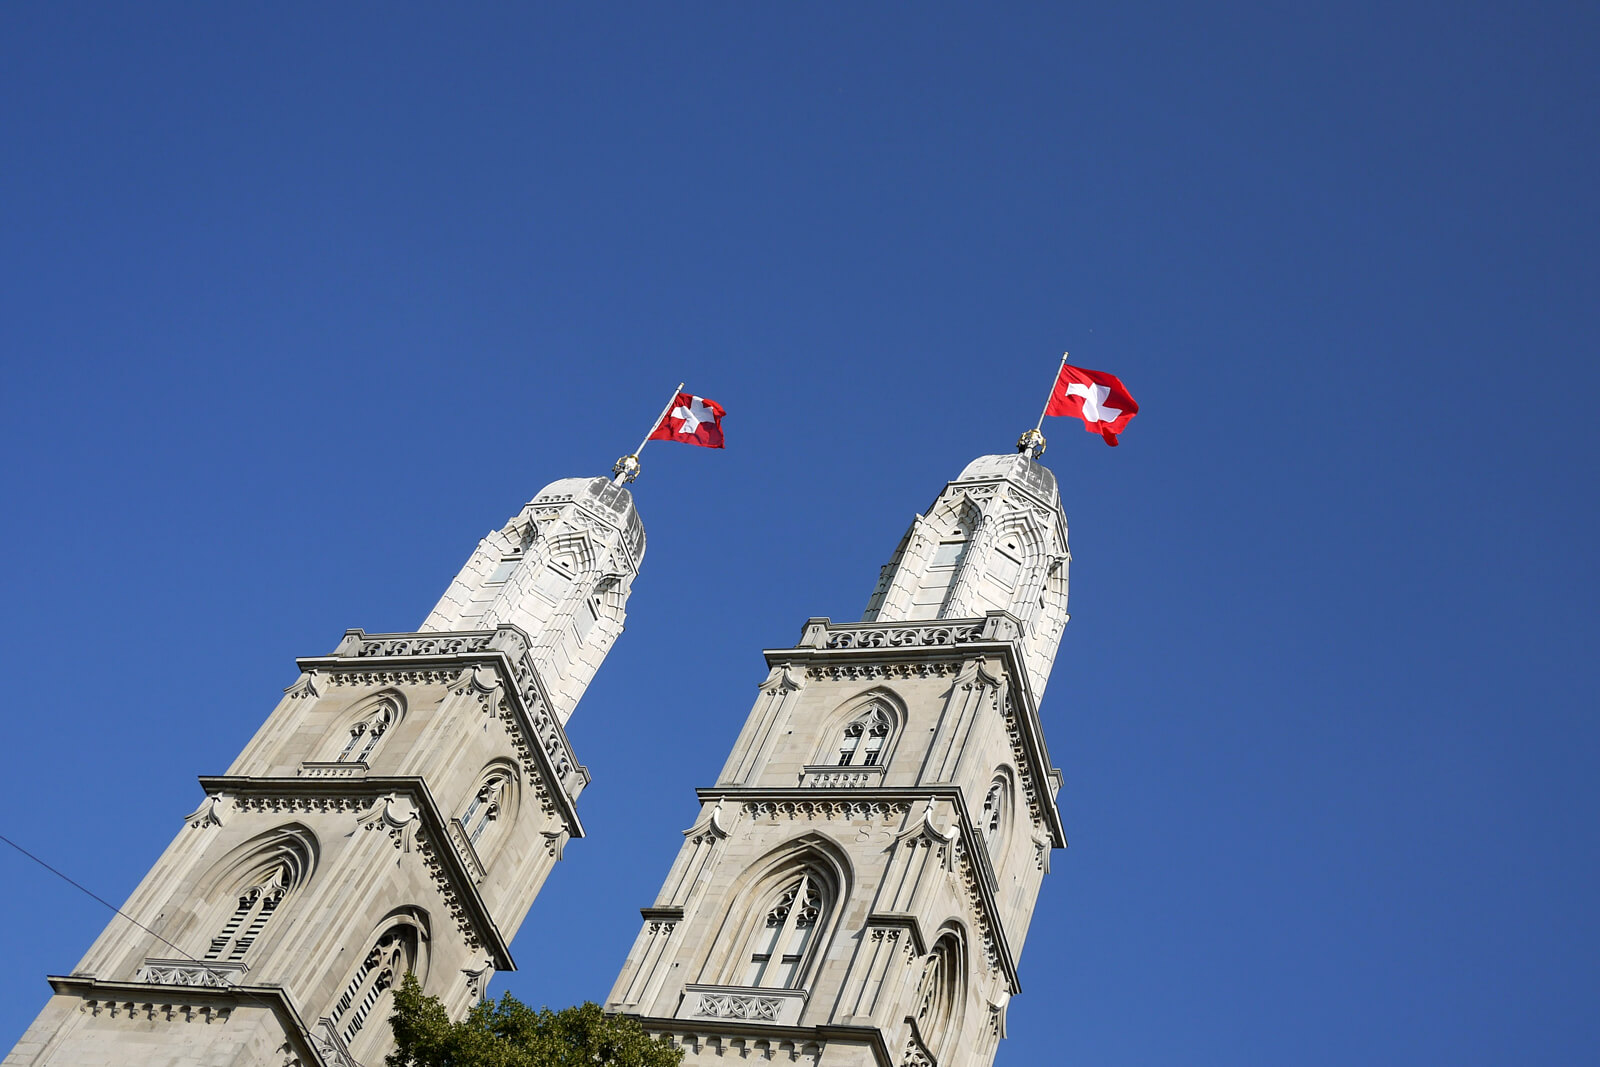 Grossmünster Towers in Zürich adorned with Swiss Flags